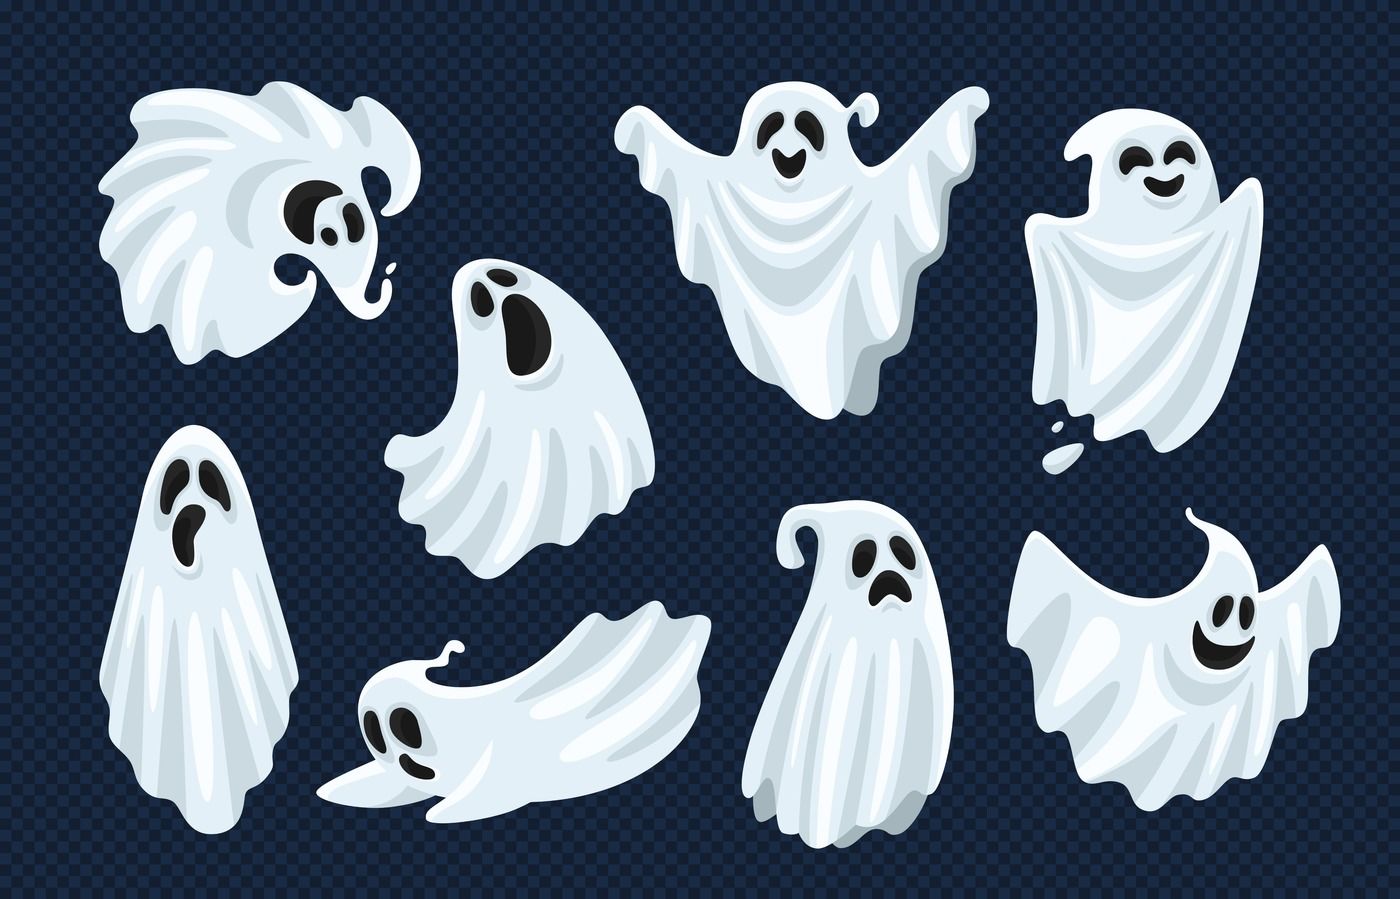 Ghost character. Halloween scary ghostly monster, dead boo spook